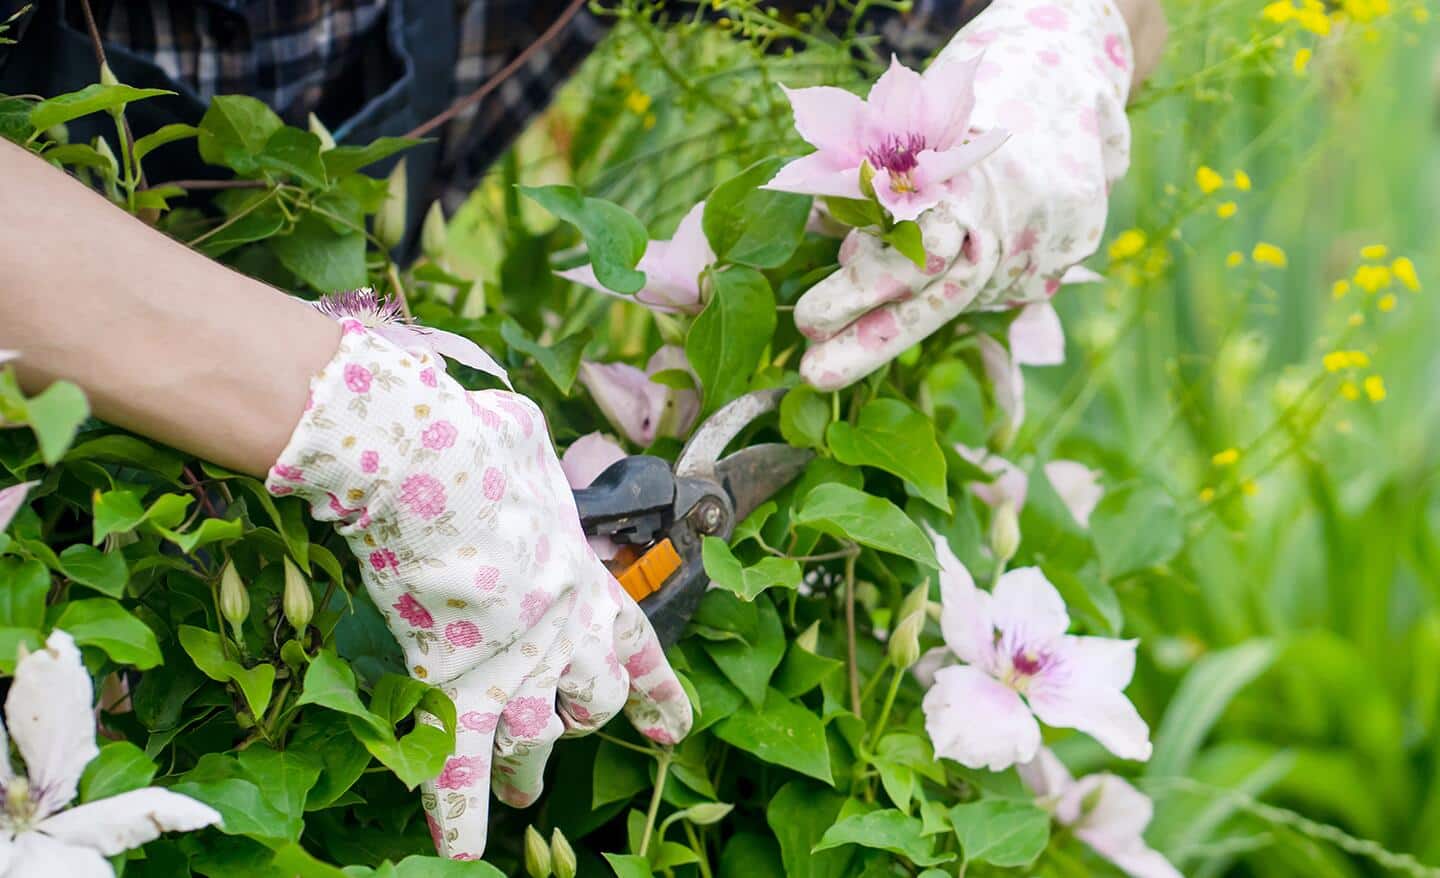 Gardener using pruning shears to trim flowers from clematis vine